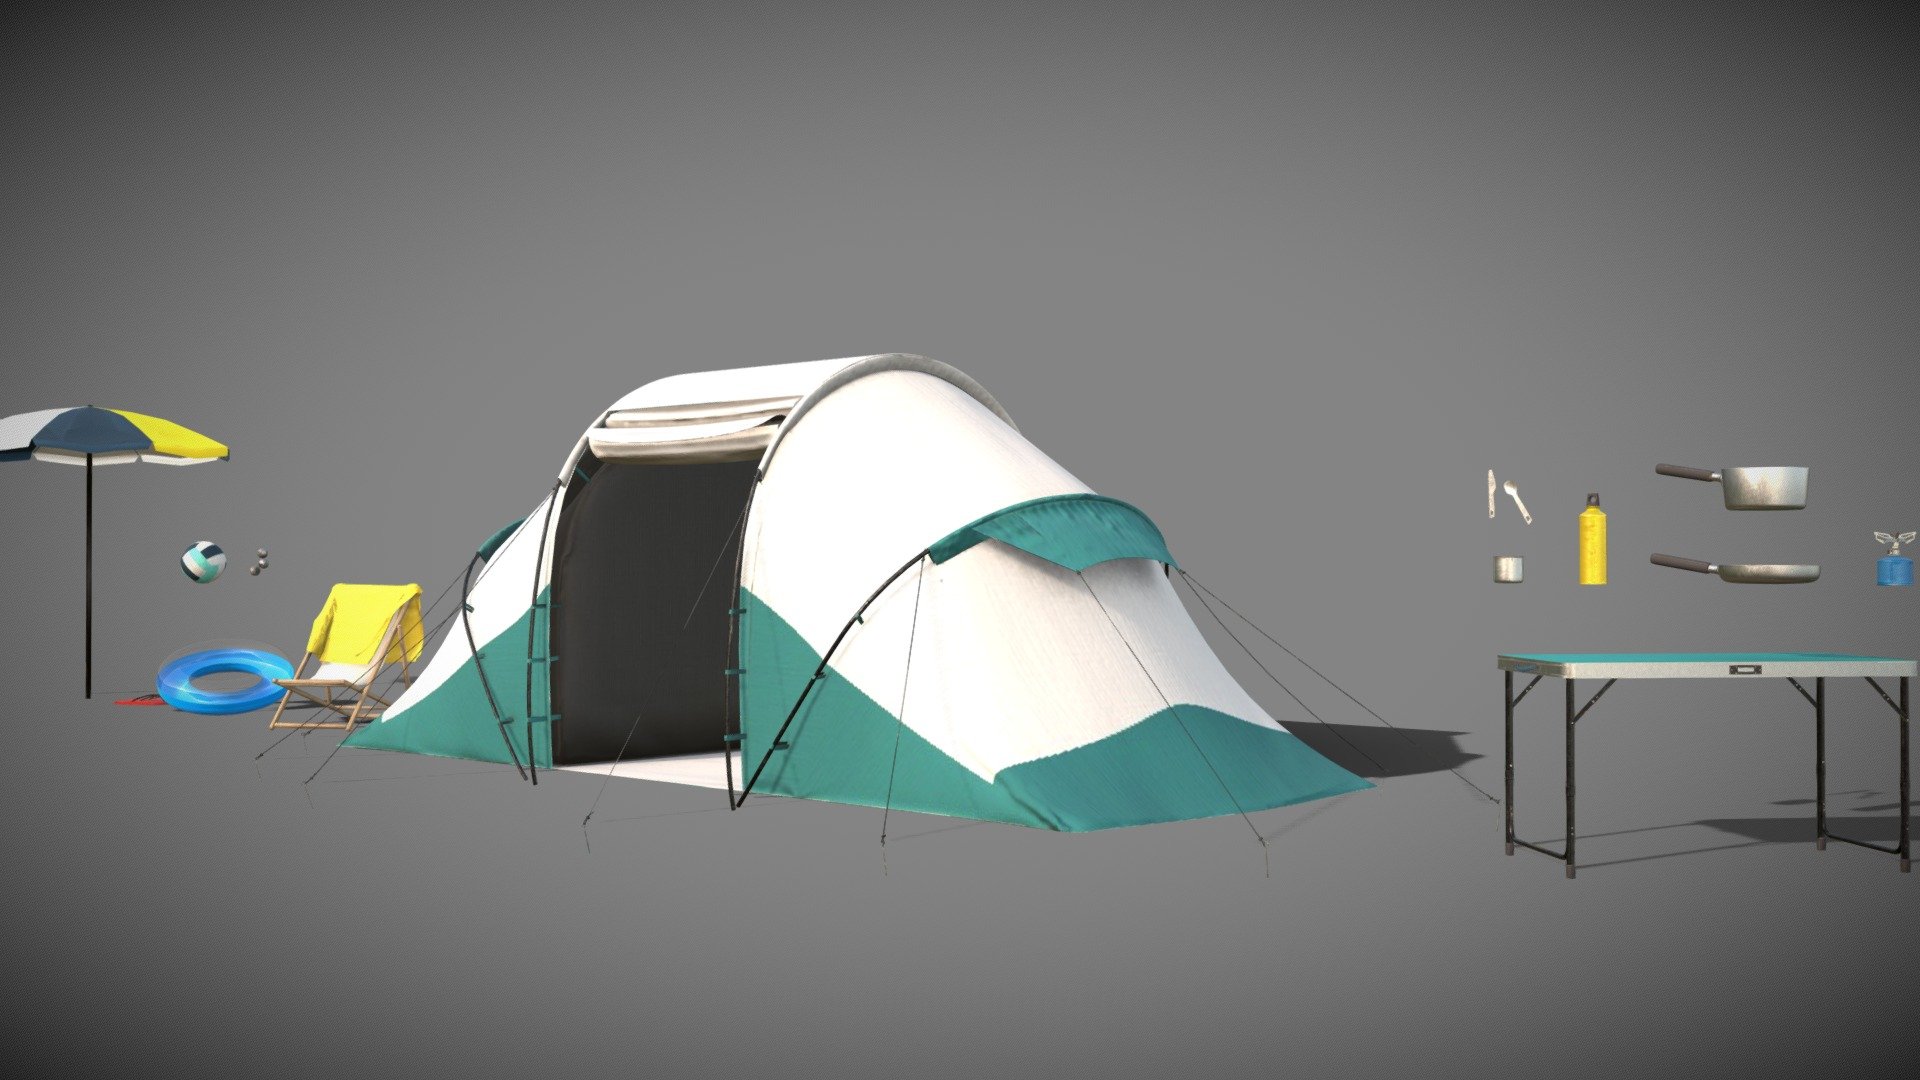 Medium poly made with blender
texture substance
Set of camping with : 
tent
umbrellas
thong
volleyball
bowling
ball
deskchair
towel
table
bar stool
fork
knife
cup
gourd
camping stove
water wings
pan - Camping Set tent - Buy Royalty Free 3D model by lampyre3d 3d model